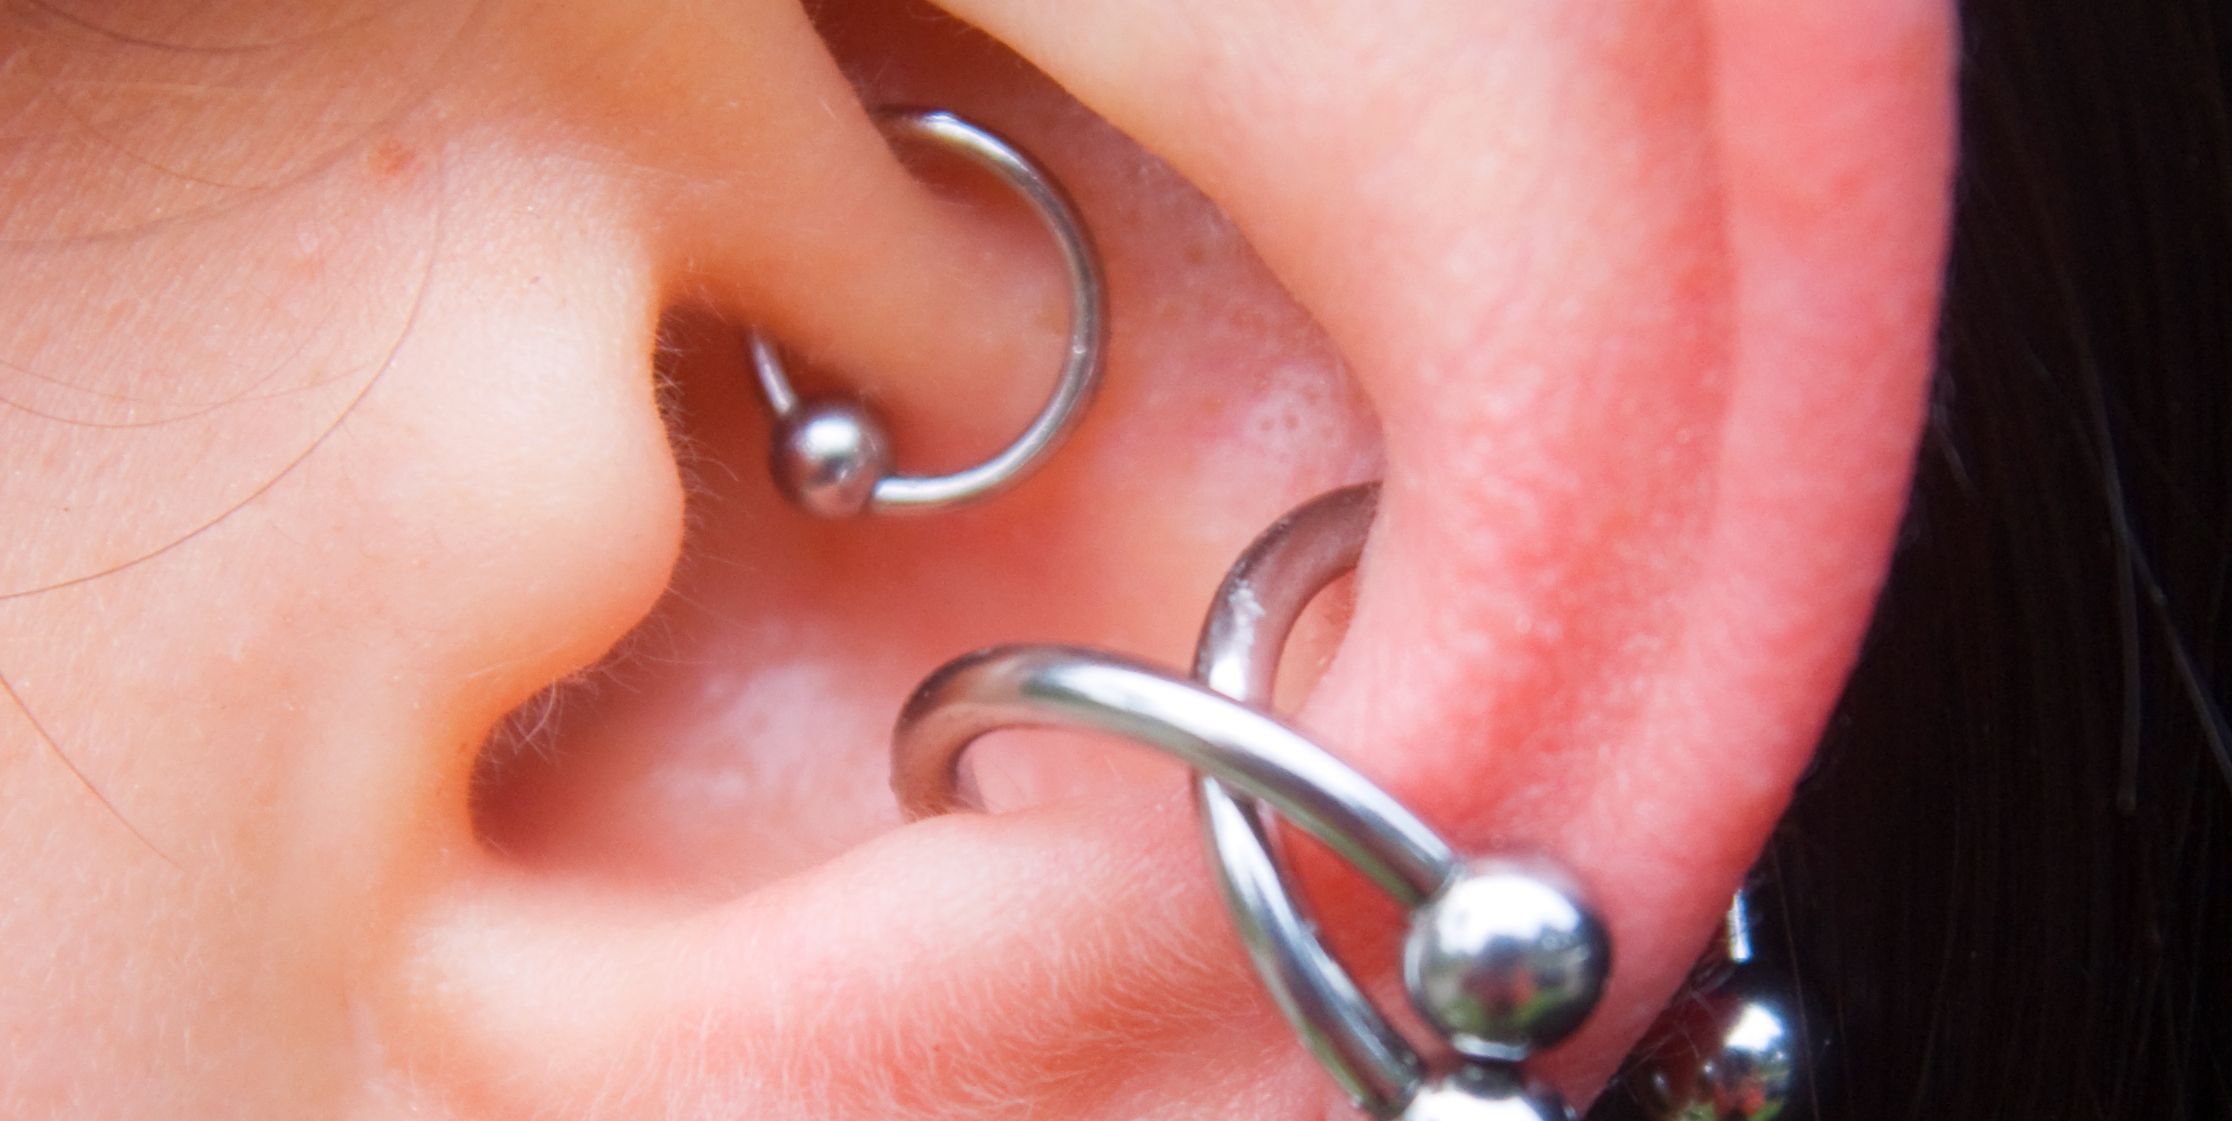 Are Daith Piercings A Legit Migraine Treatment? MDs Weigh In